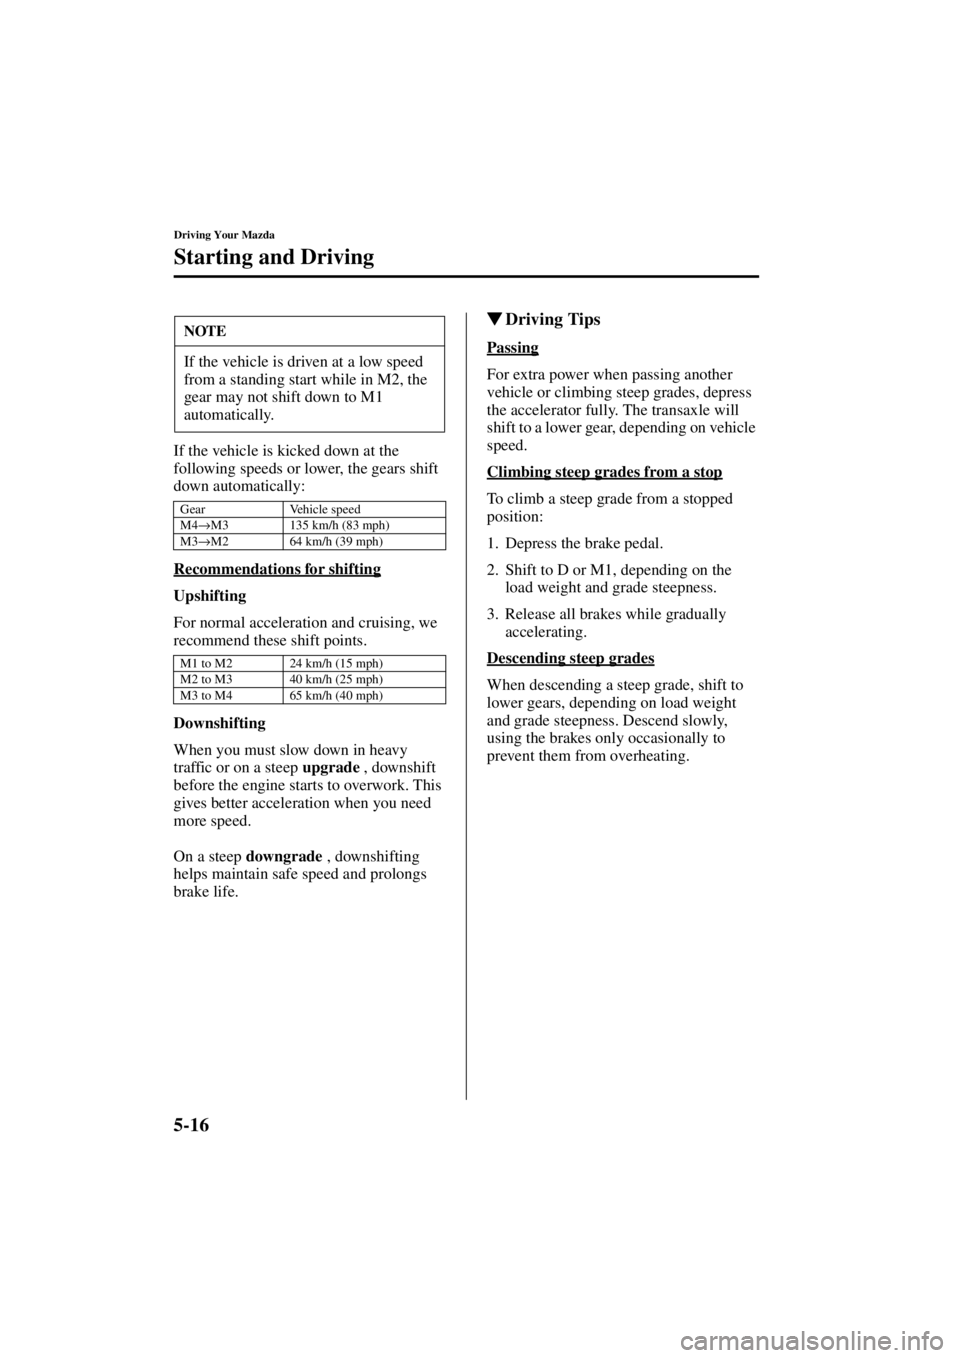 MAZDA MODEL 3 5-DOOR 2004  Owners Manual 5-16
Driving Your Mazda
Starting and Driving
Form No. 8S18-EA-03I
If the vehicle is kicked down at the 
following speeds or lower, the gears shift 
down automatically:
Recommendations for shifting
Ups